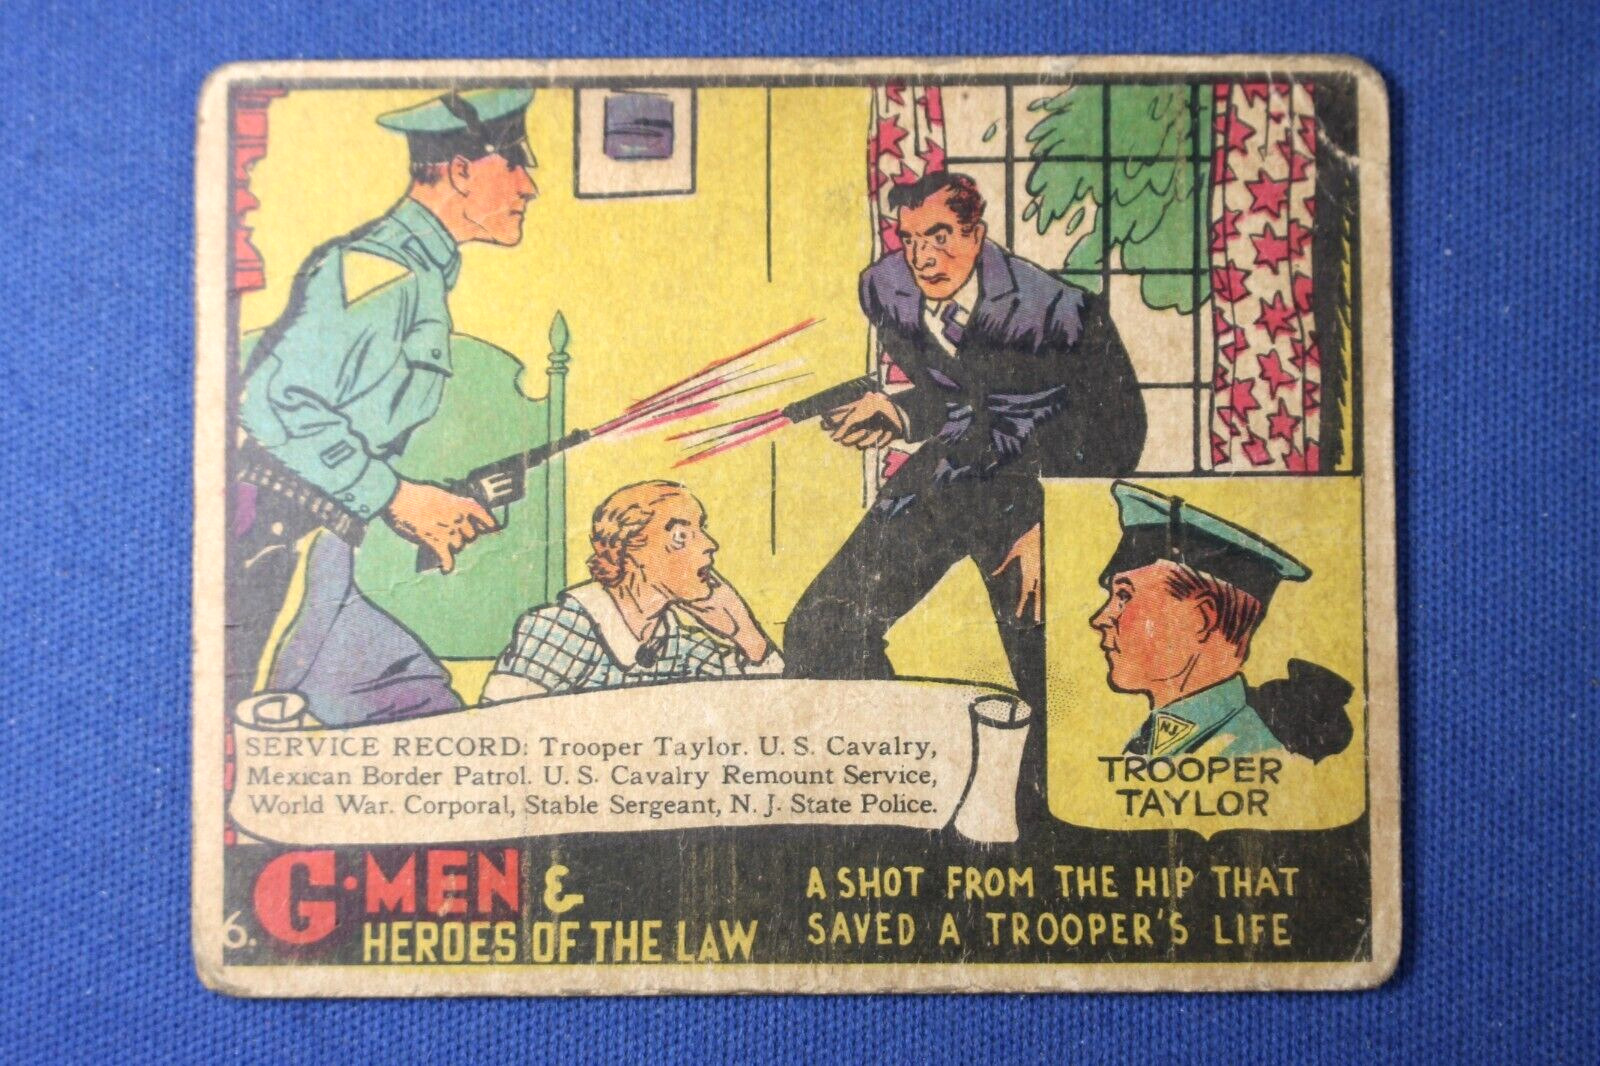 1936 Gum G-Men & Heroes of The Law - #6A Shot from the Hip... - Poor